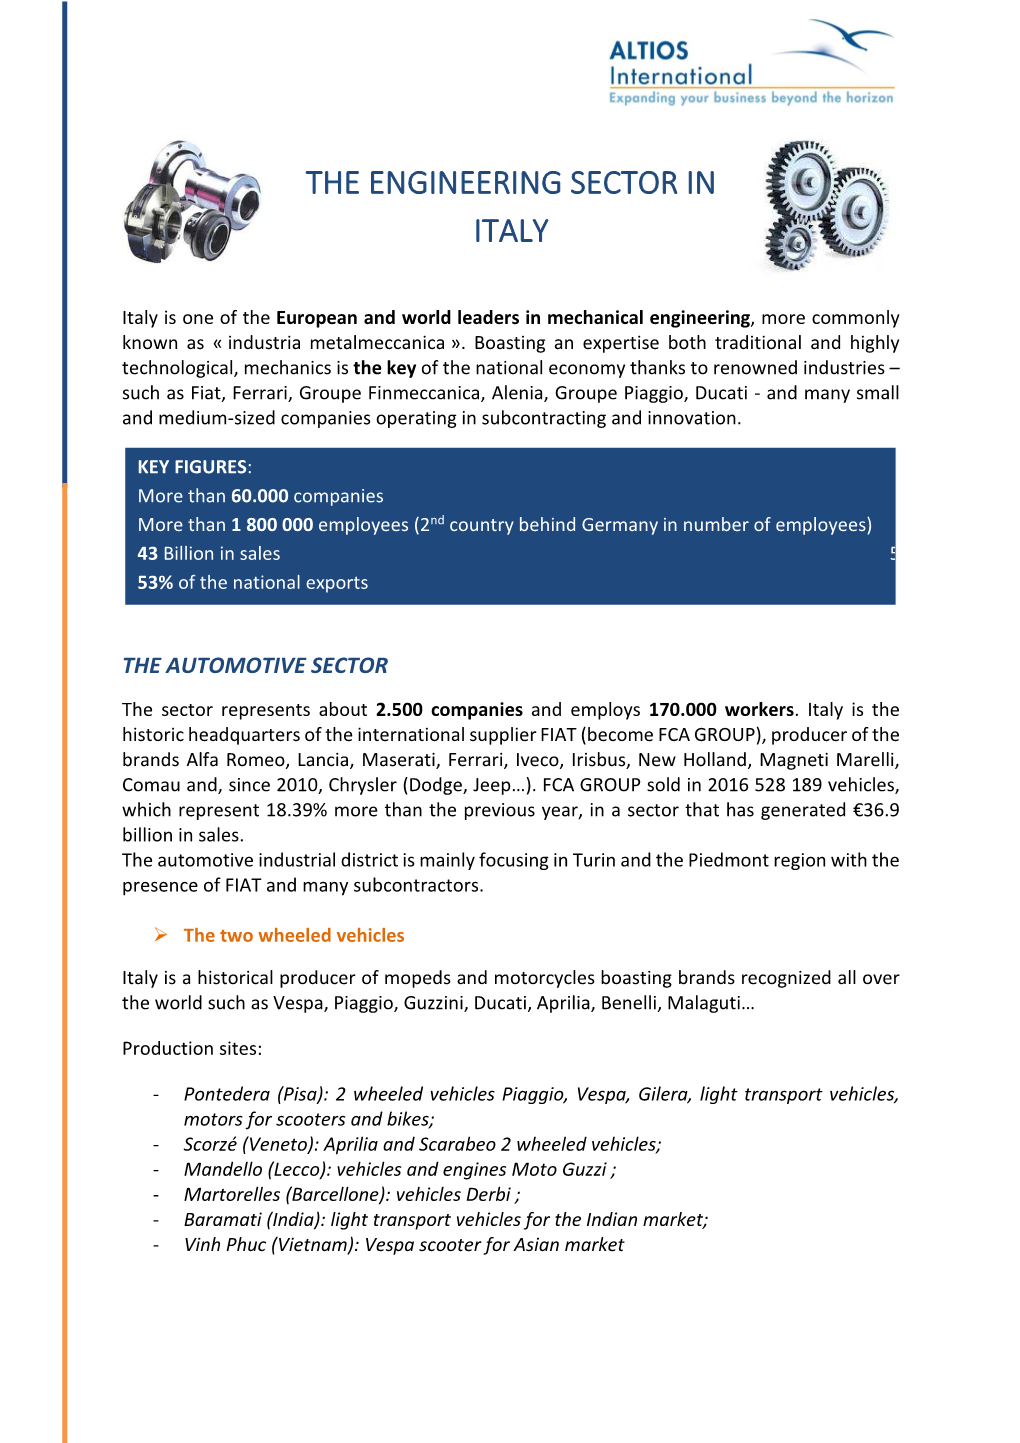 03Engineering Sector in Italy